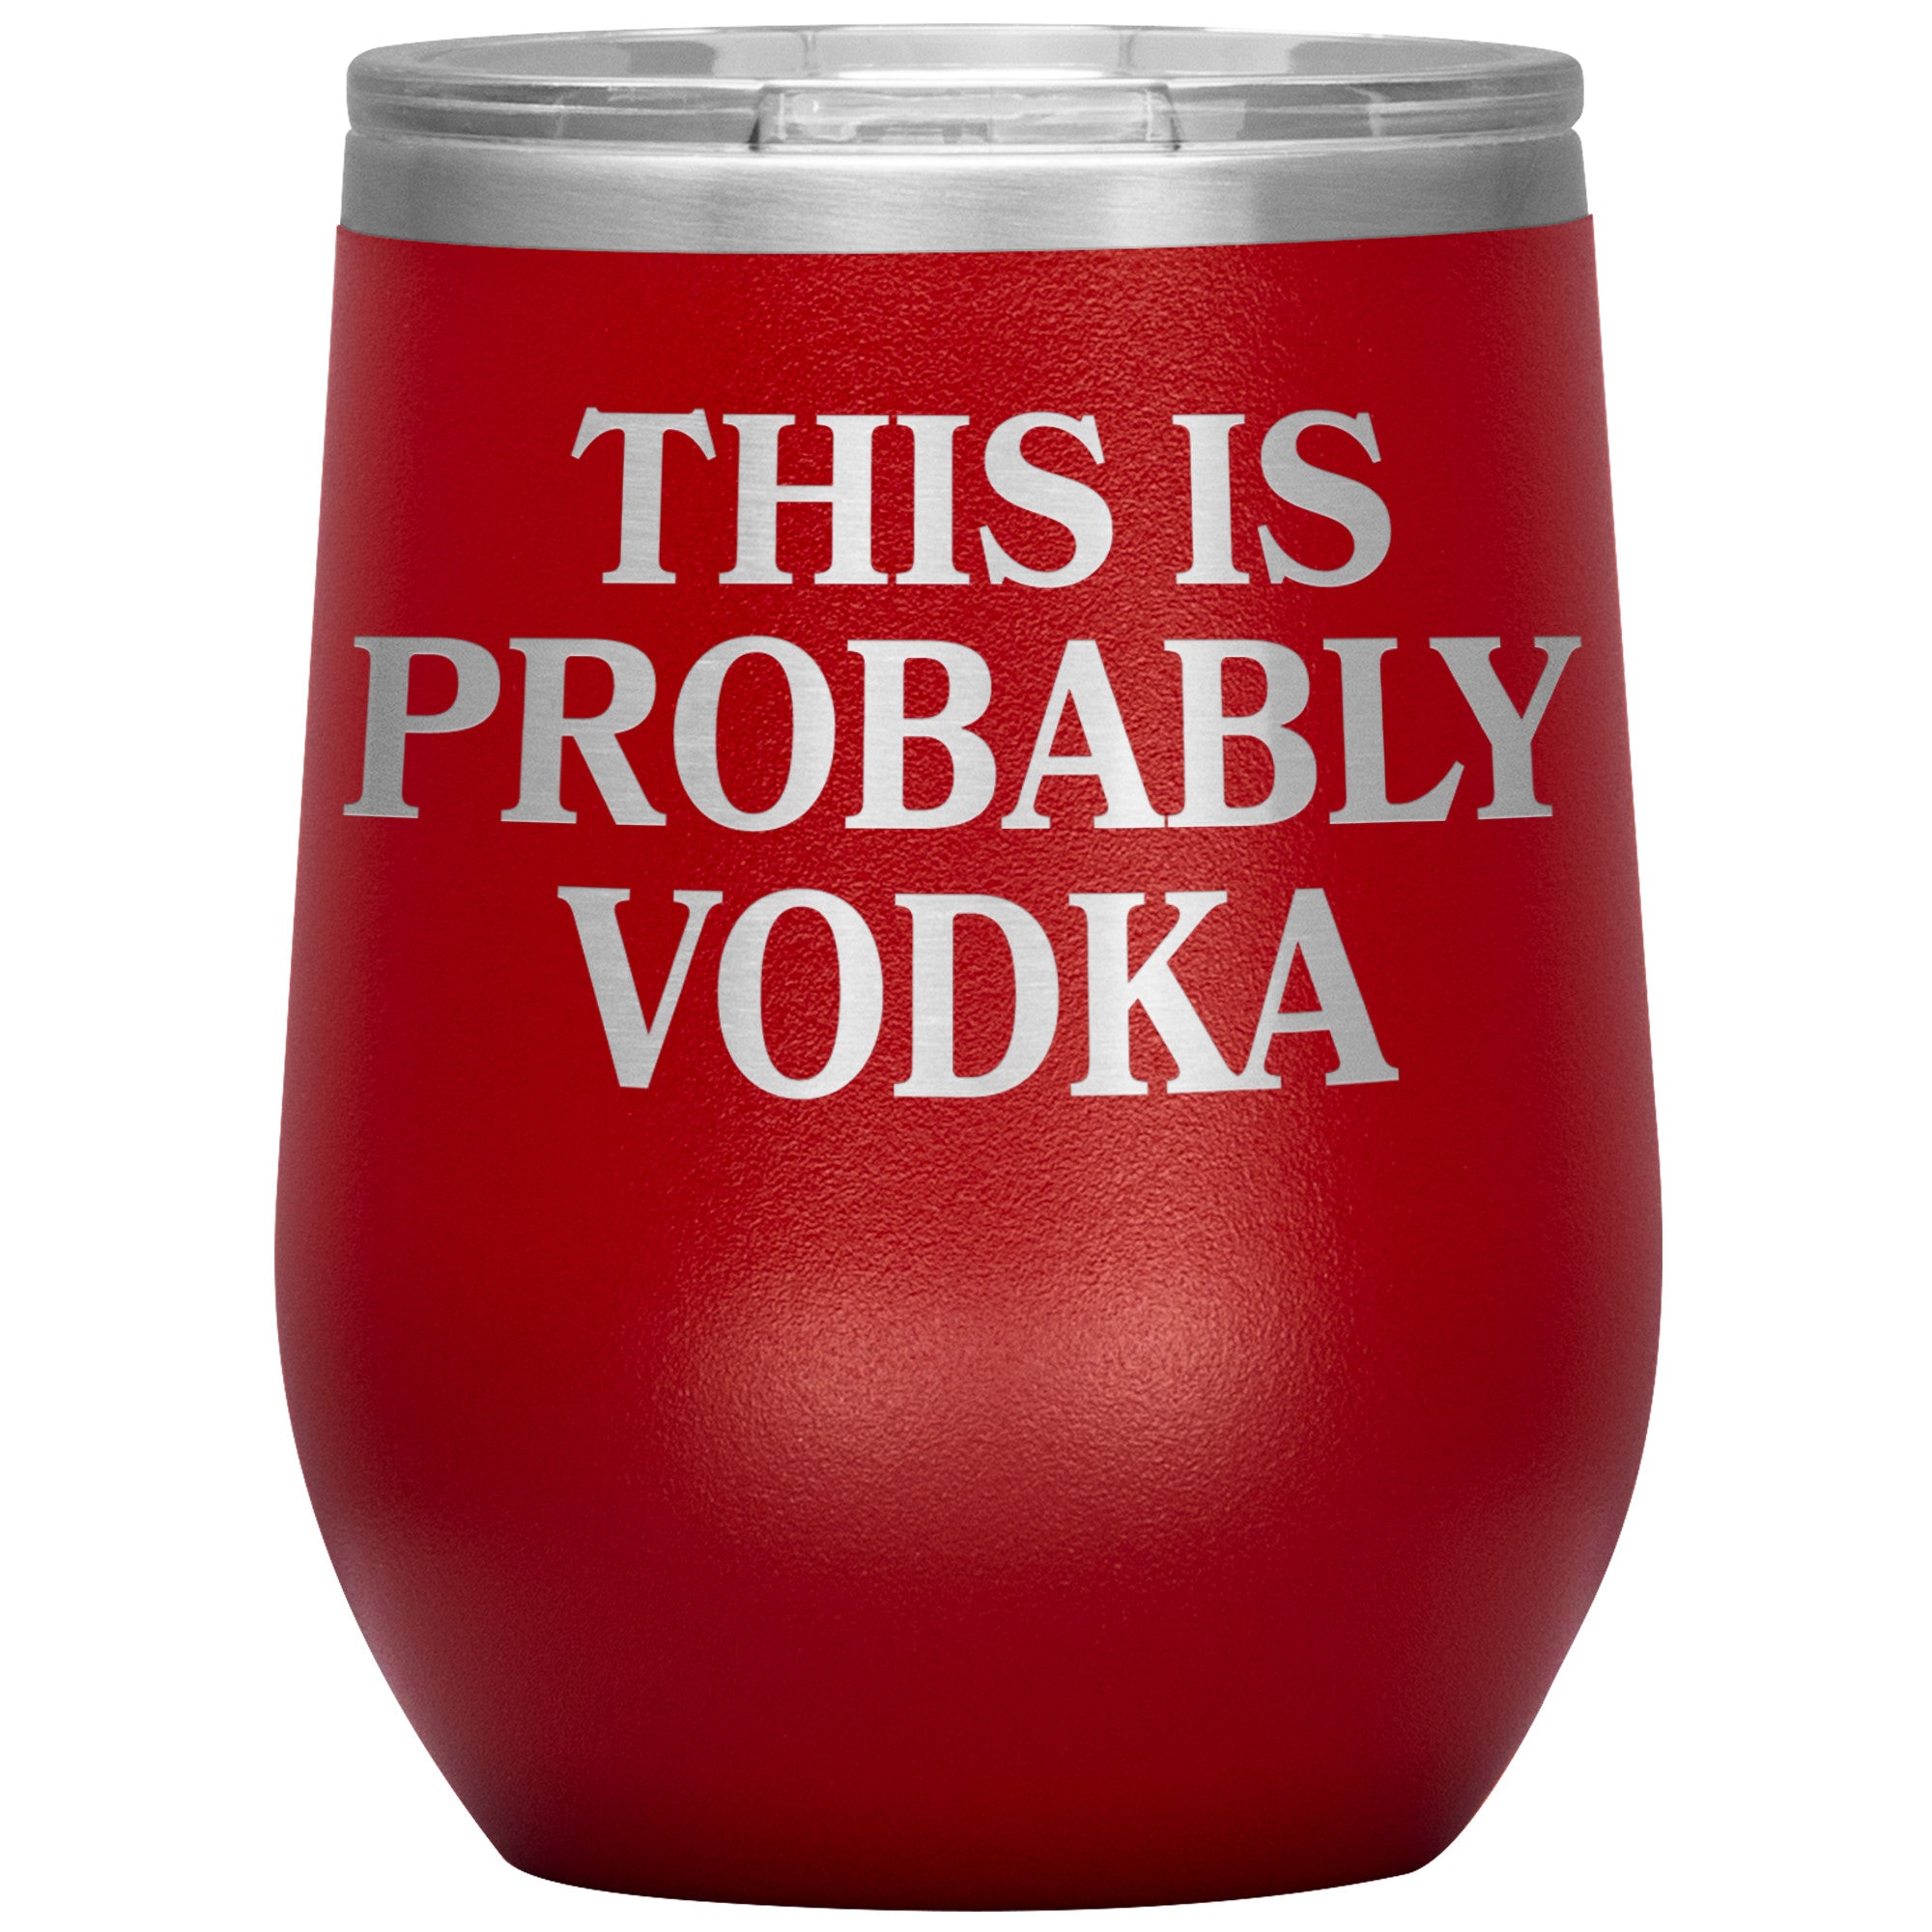 This Is Probably Vodka Insulated Wine Tumbler Tumblers teelaunch Red  